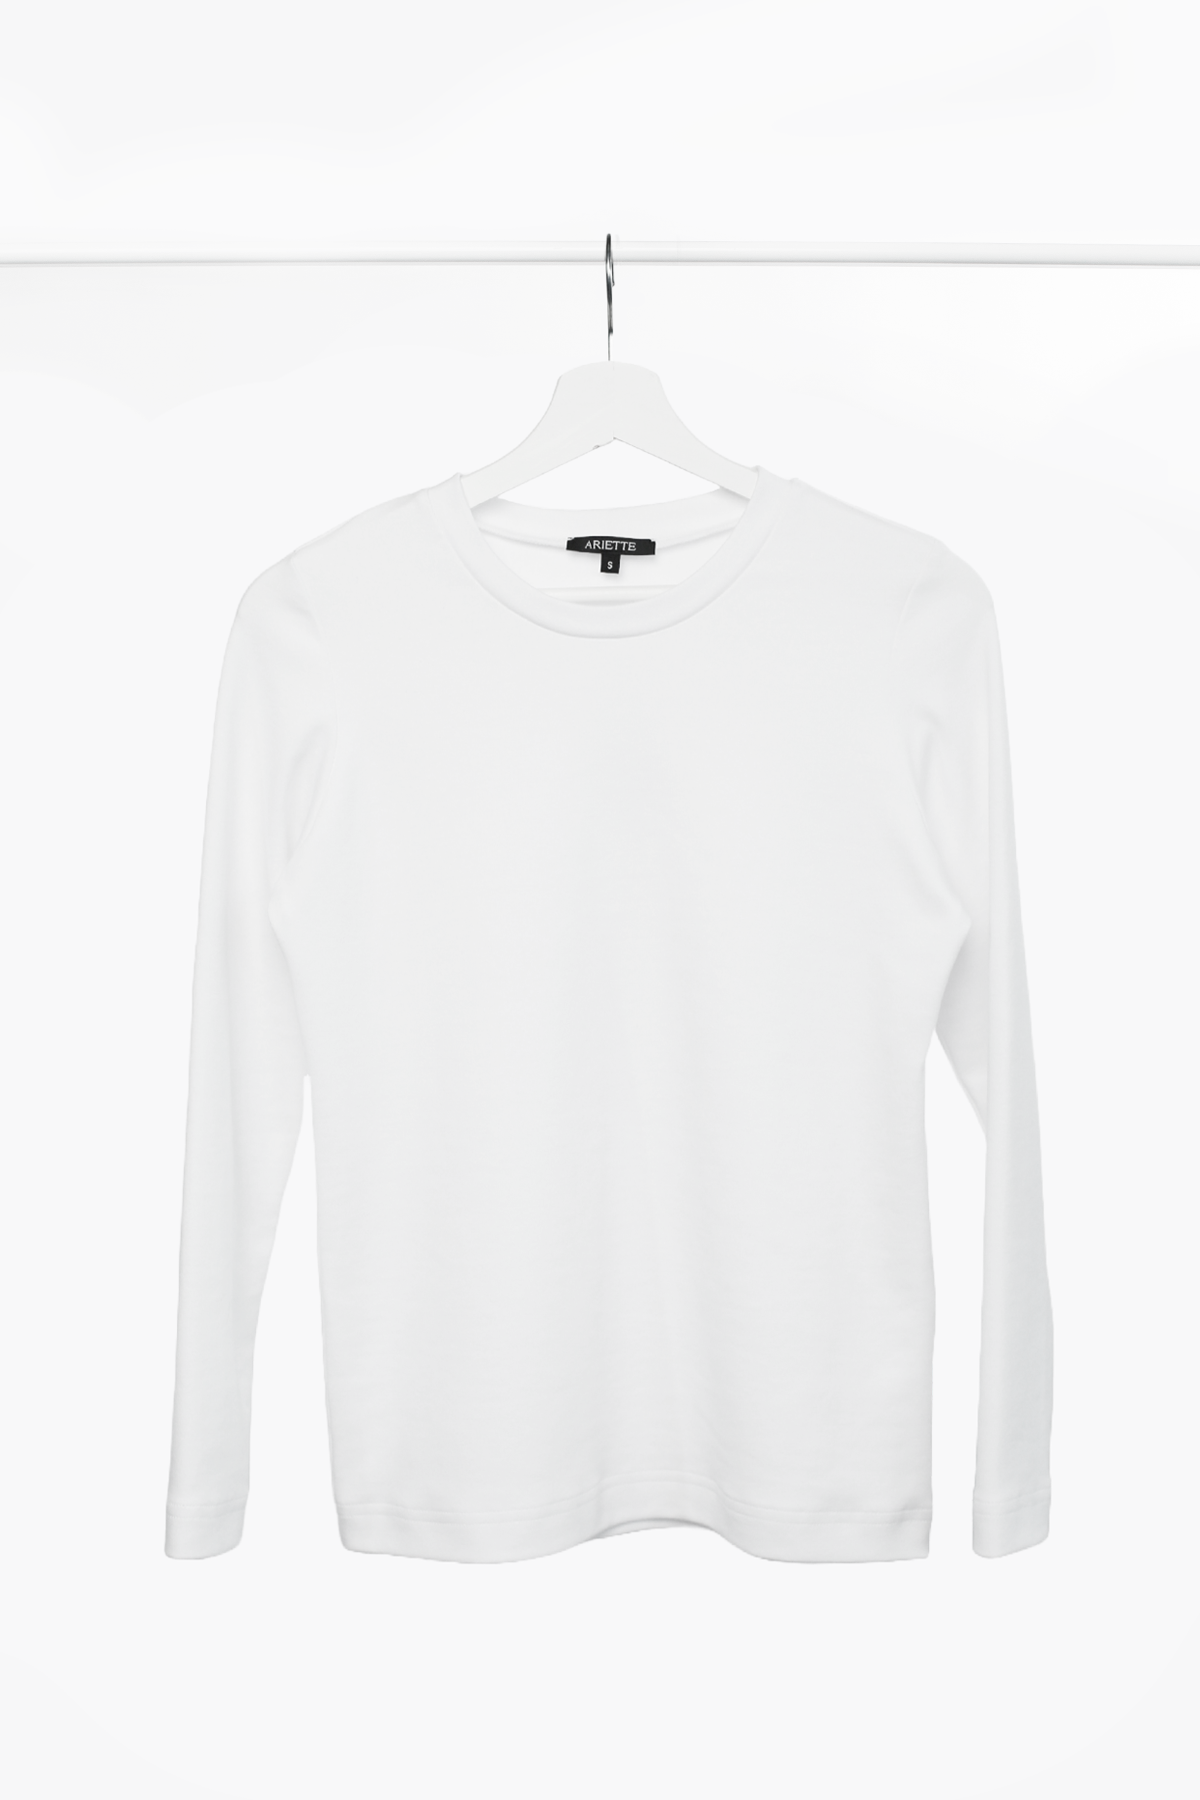 Ariette T-SHIRT WITH LONG SLEEVES WHITE